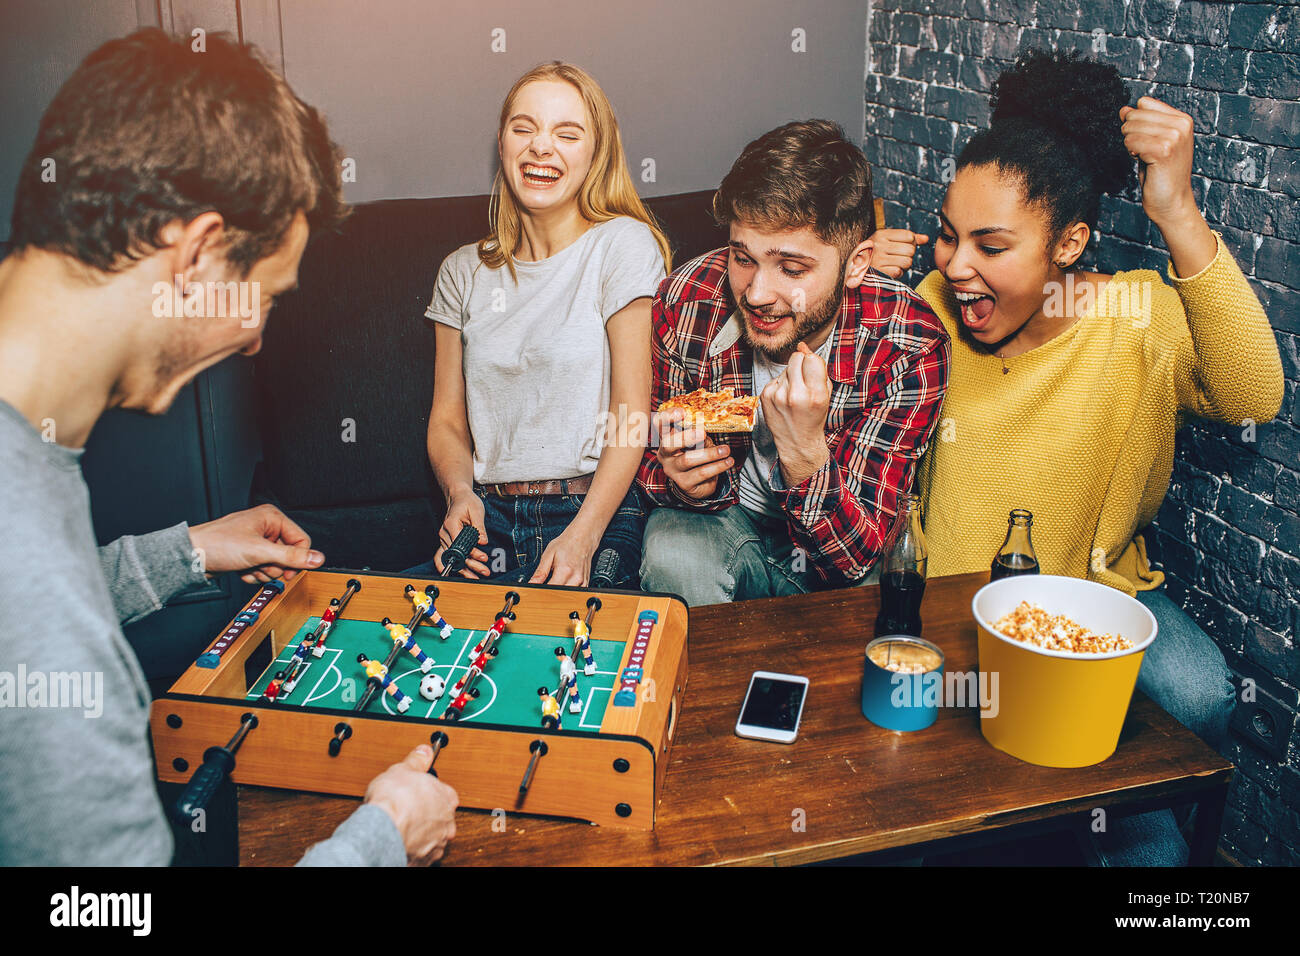 A shot where boys are playing football board game on the table while girls are cheering. Everybody is happy thinking only about the game Stock Photo